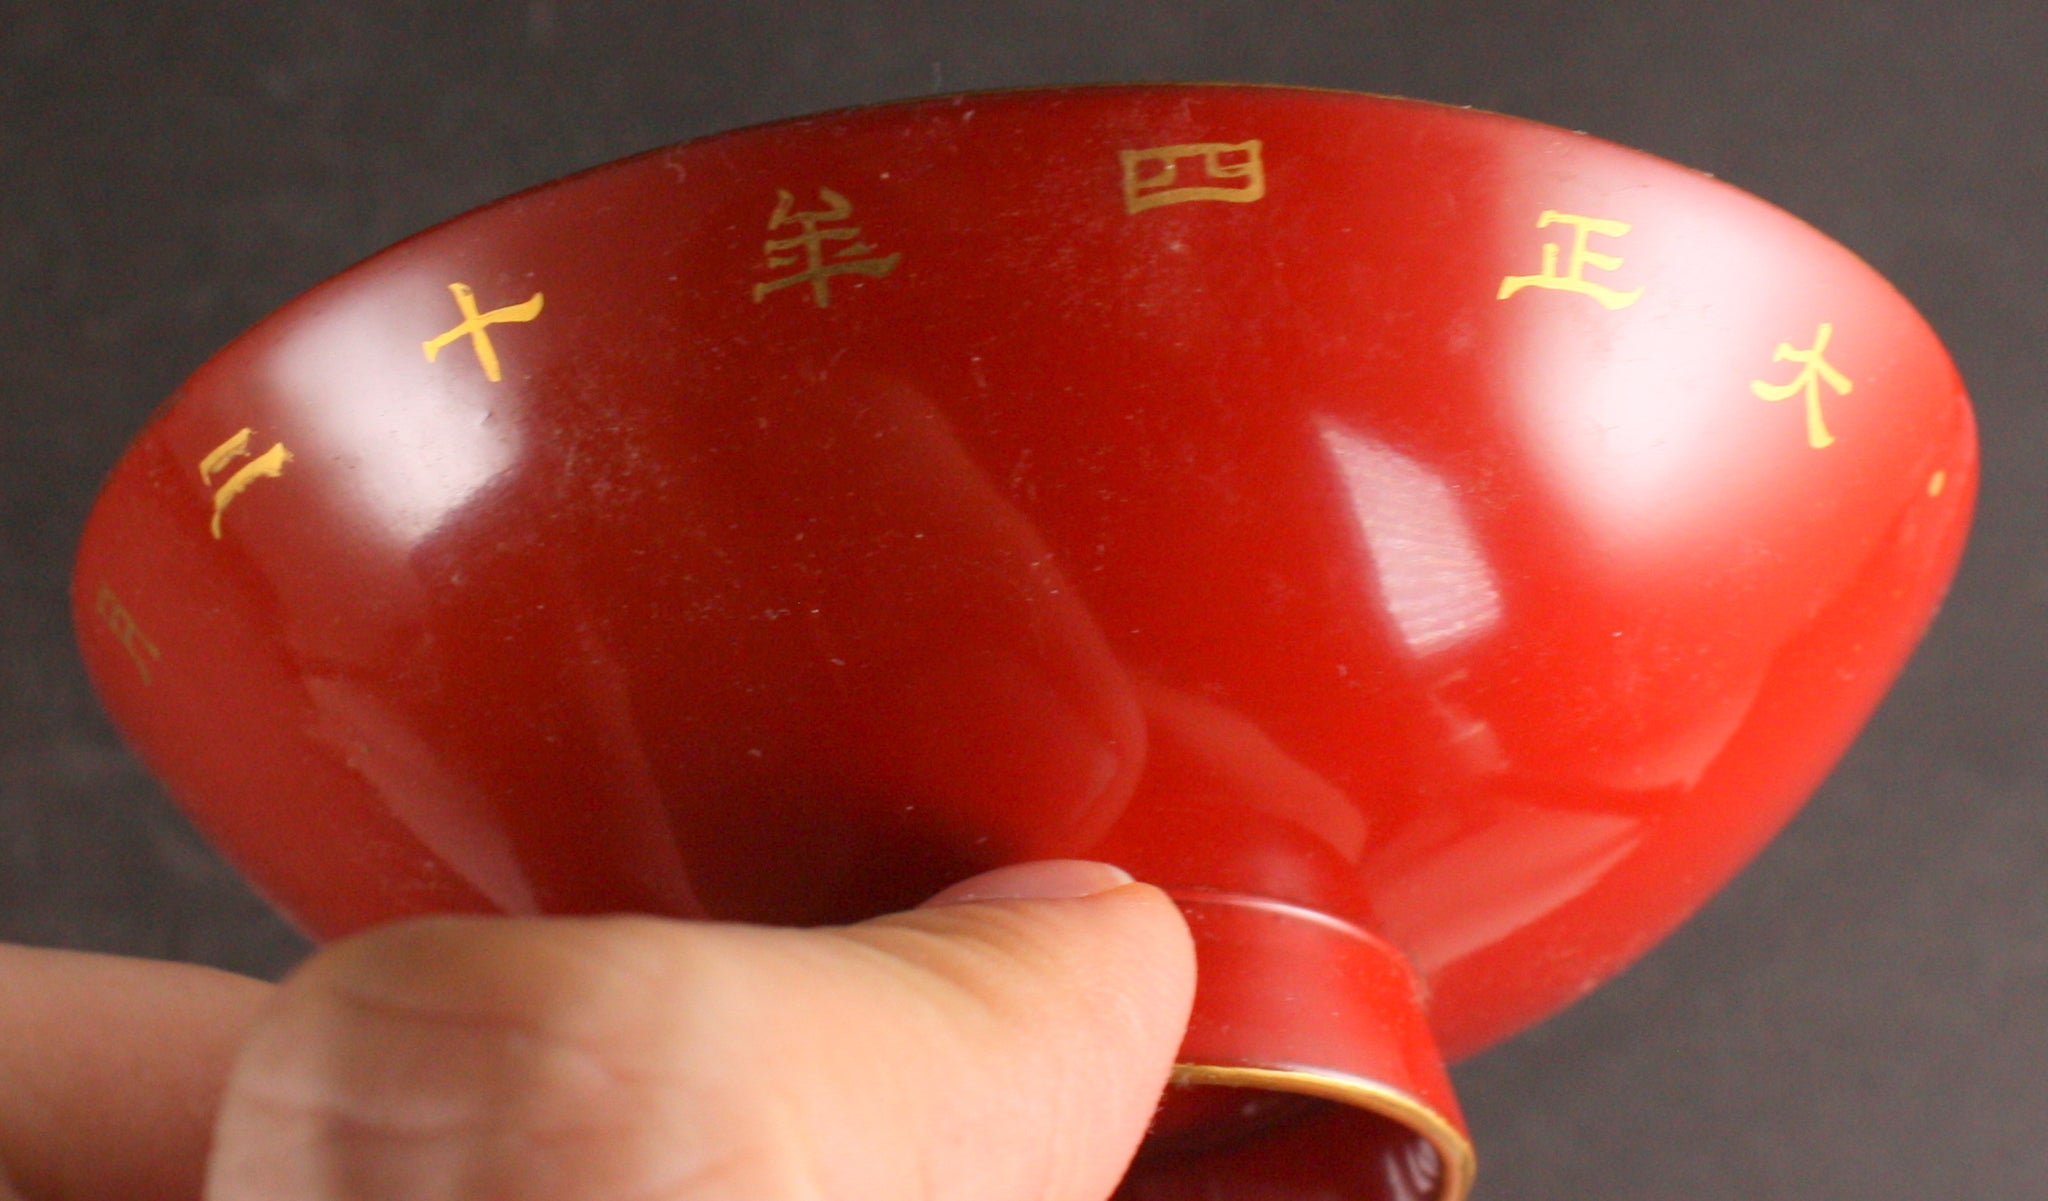 Antique Japanese Military 1915 Taisho Enthronement Troop Review Participation Army Sake Cup